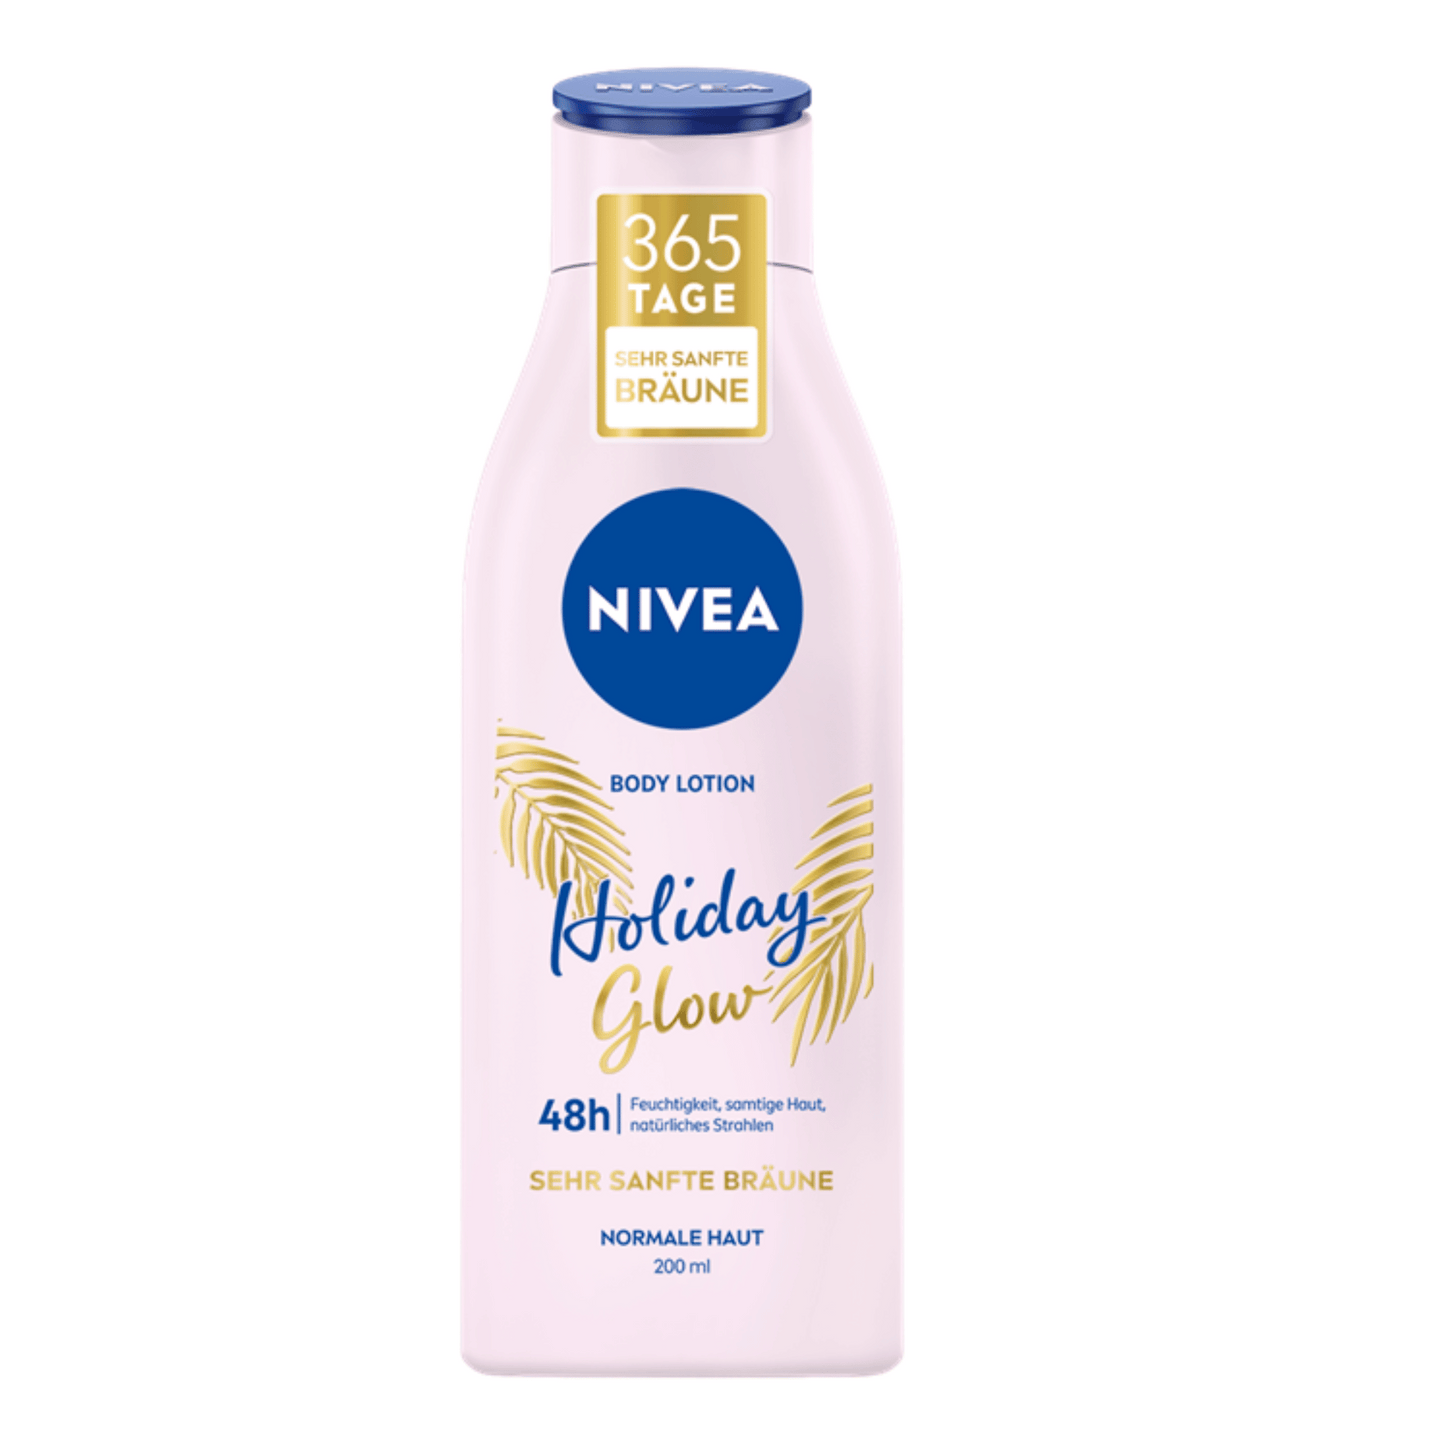 Primary Image of Holiday Glow Body Lotion